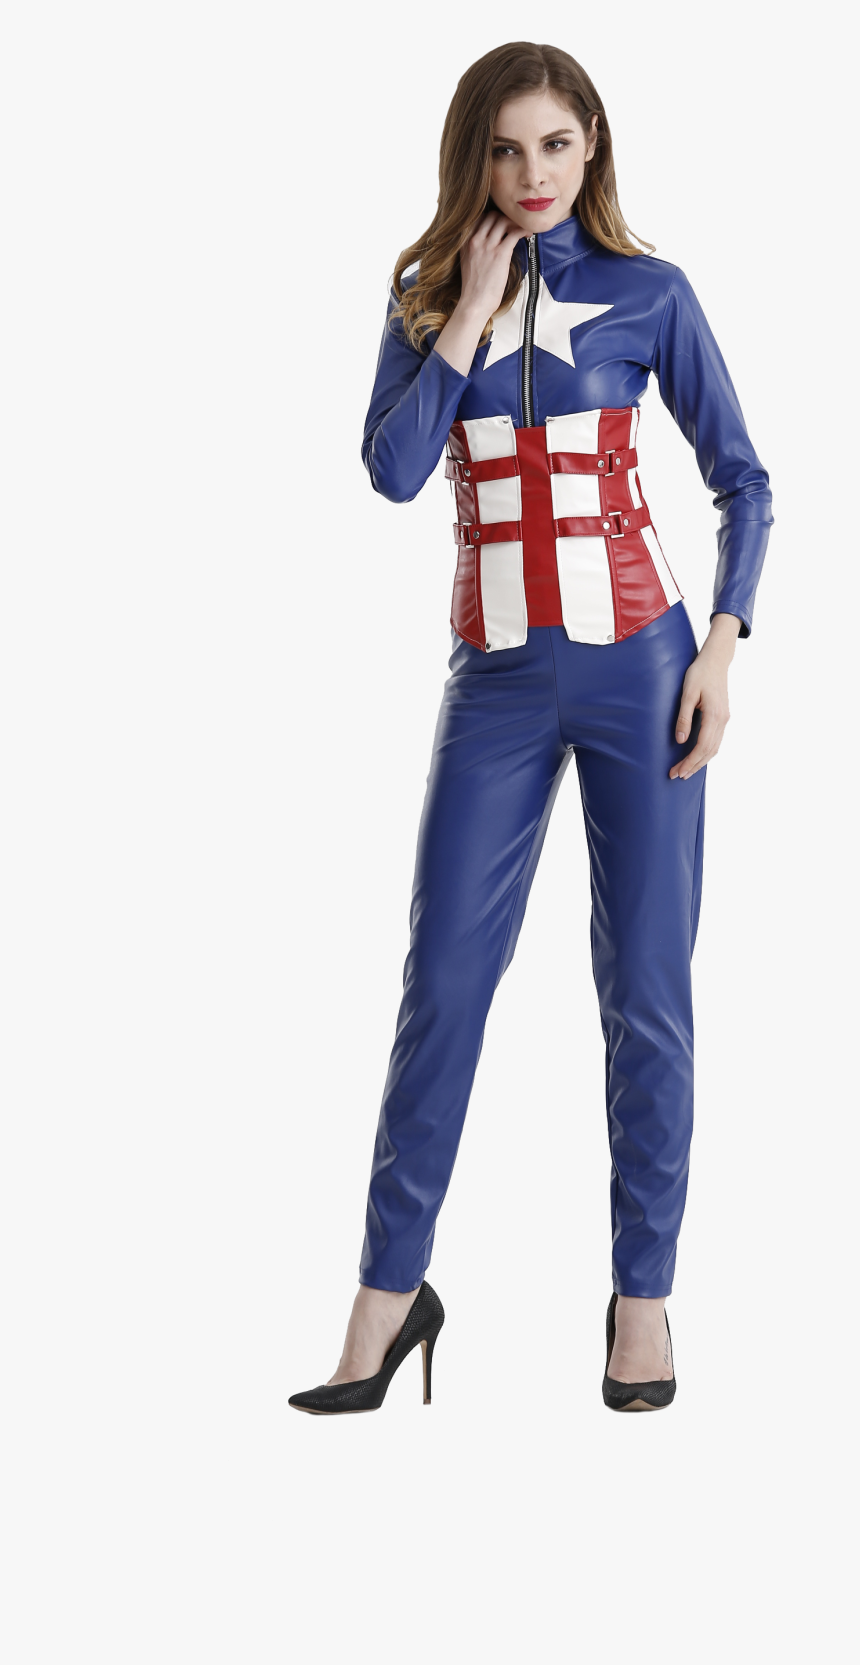 Sexy Costume Png, Transparent Png, Free Download